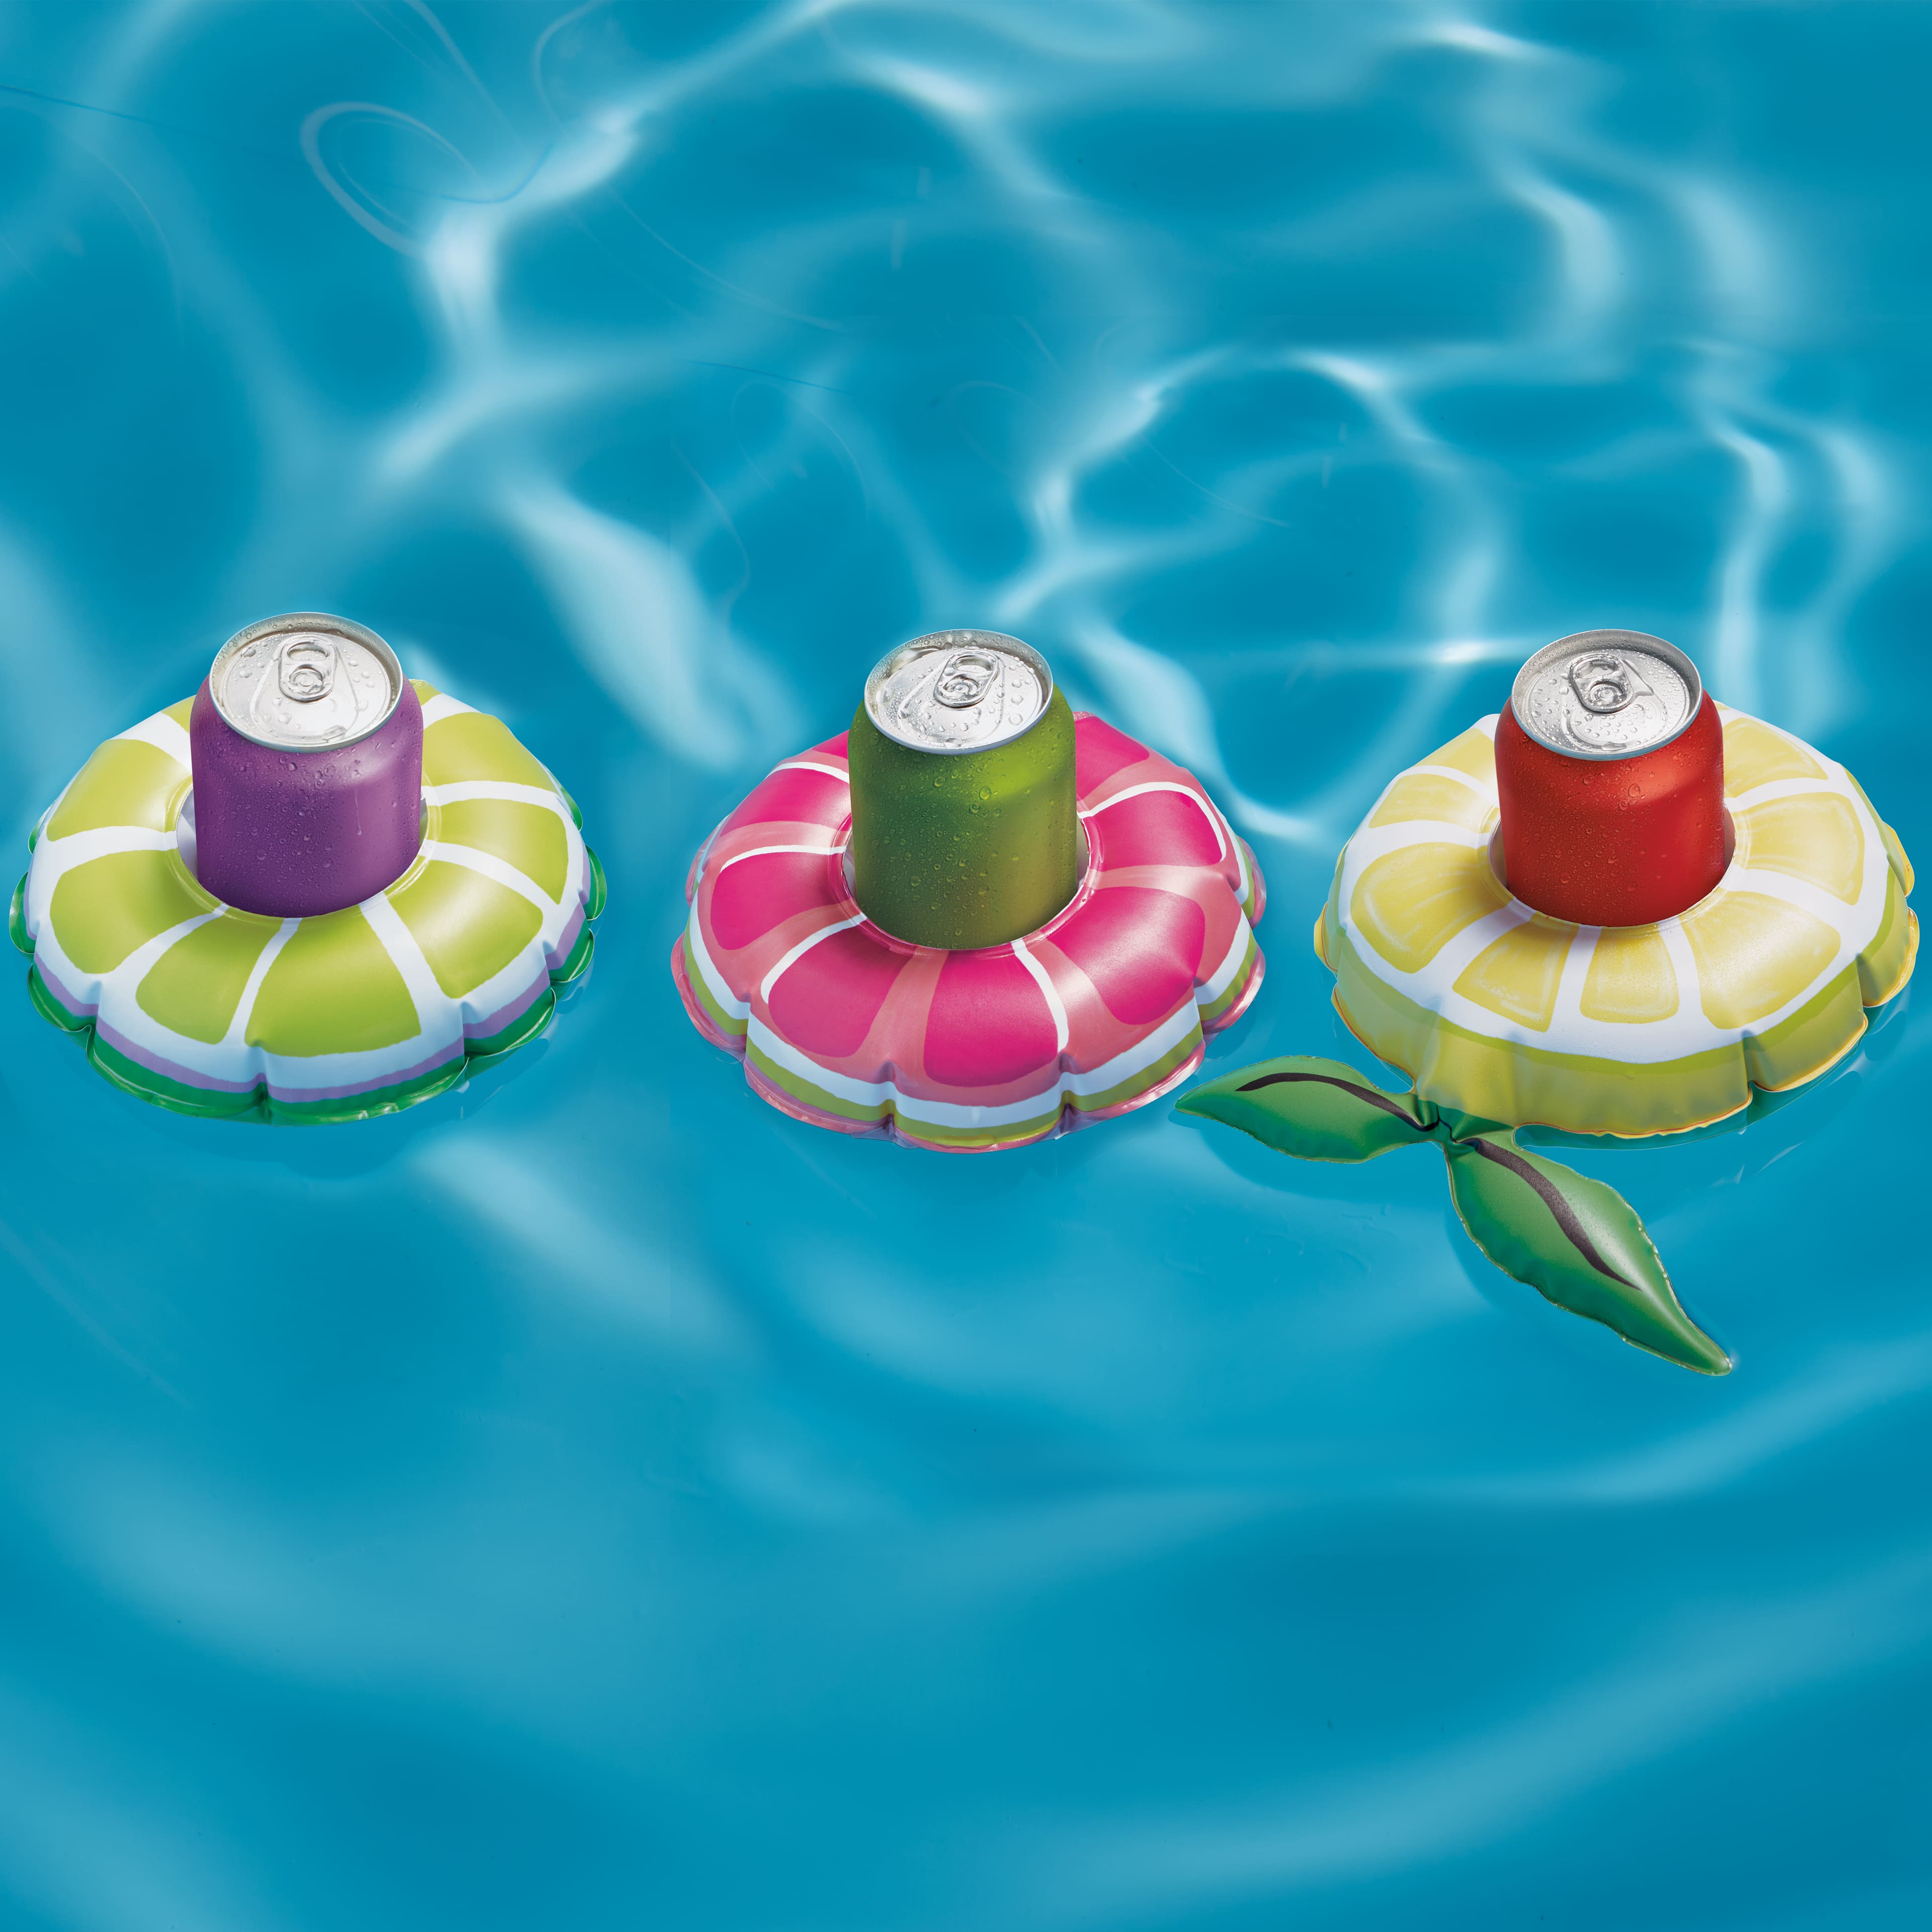 Assorted 7&#x22; Inflated Summer Citrus Fruit Drink Holder by Ashland&#xAE;, 1pc.